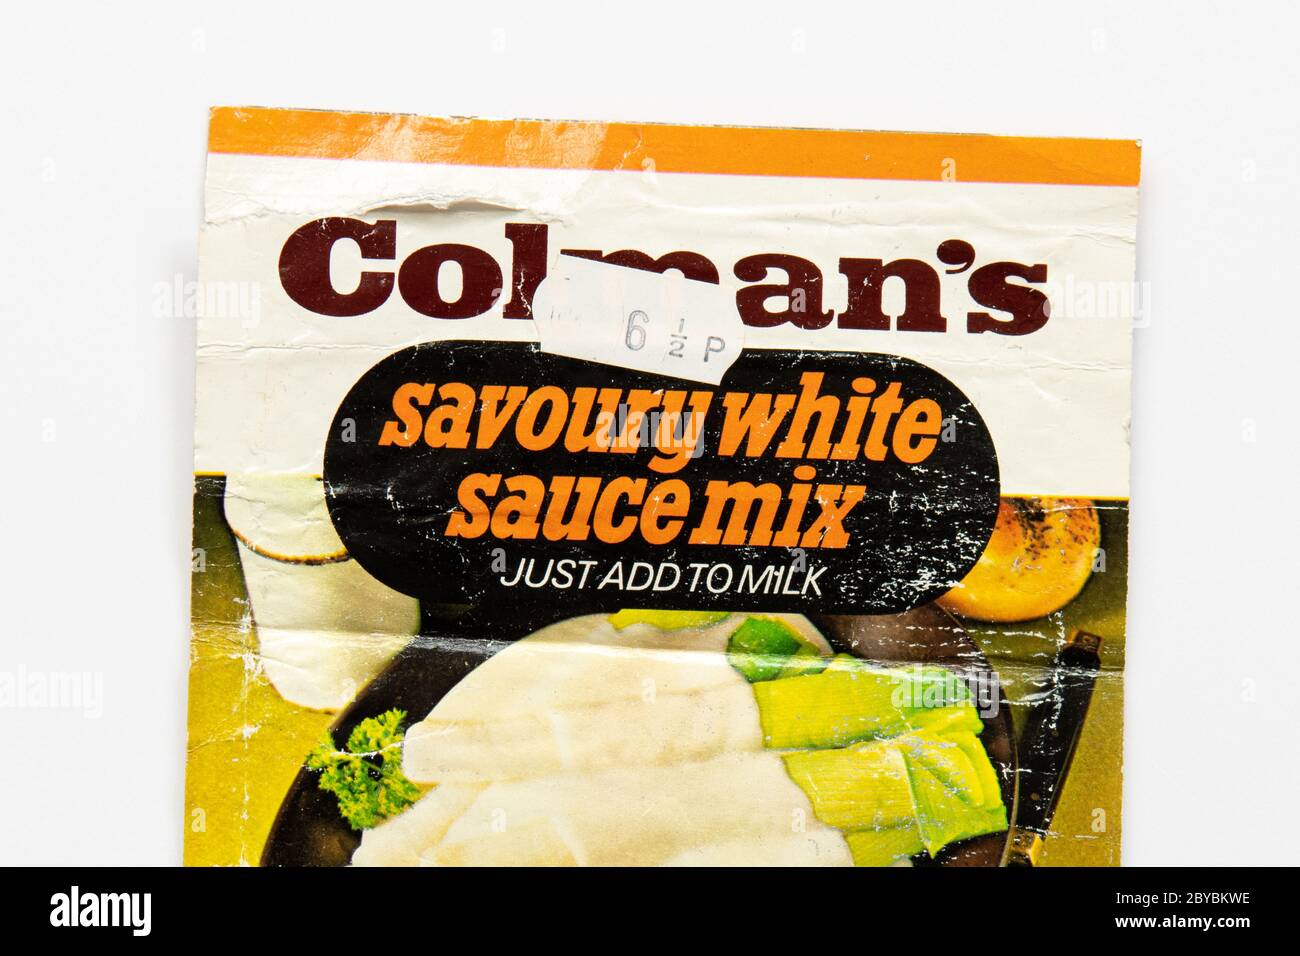 vintage Colmans savoury white sauce mix packet with 6 and a half pence price sticker - UK Stock Photo